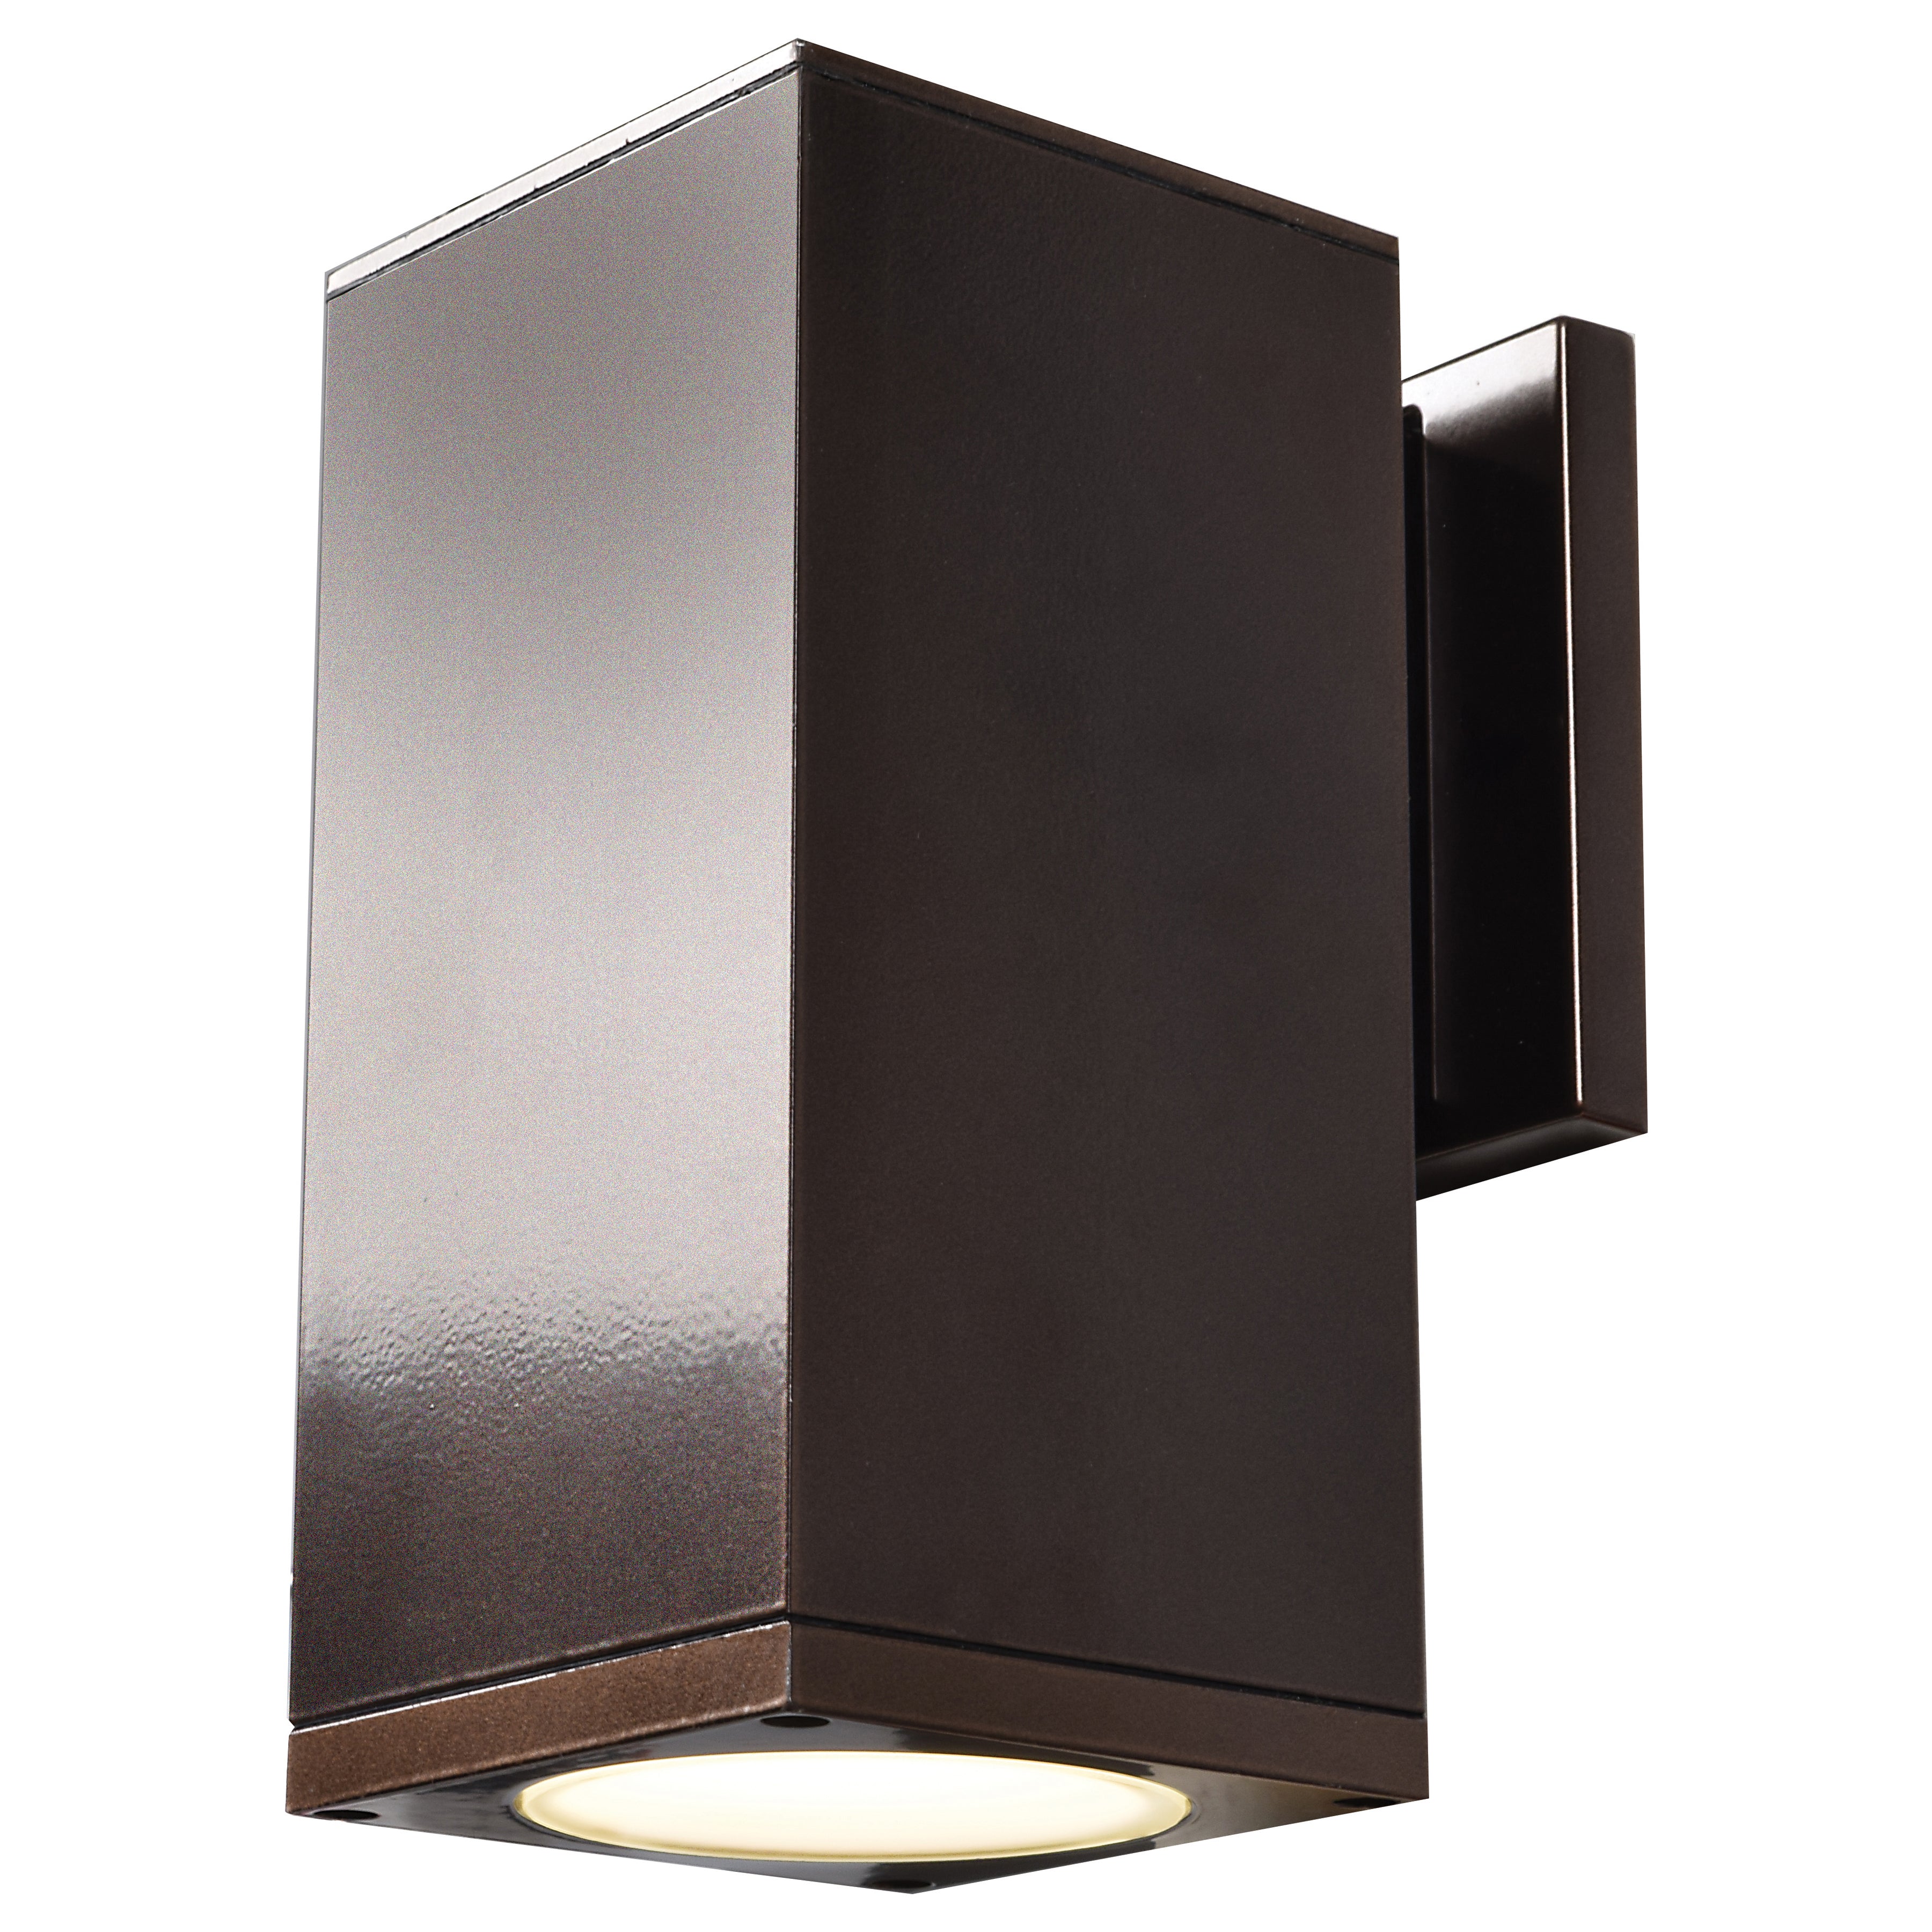 Bayside Outdoor LED Wall Mount Sconce Light